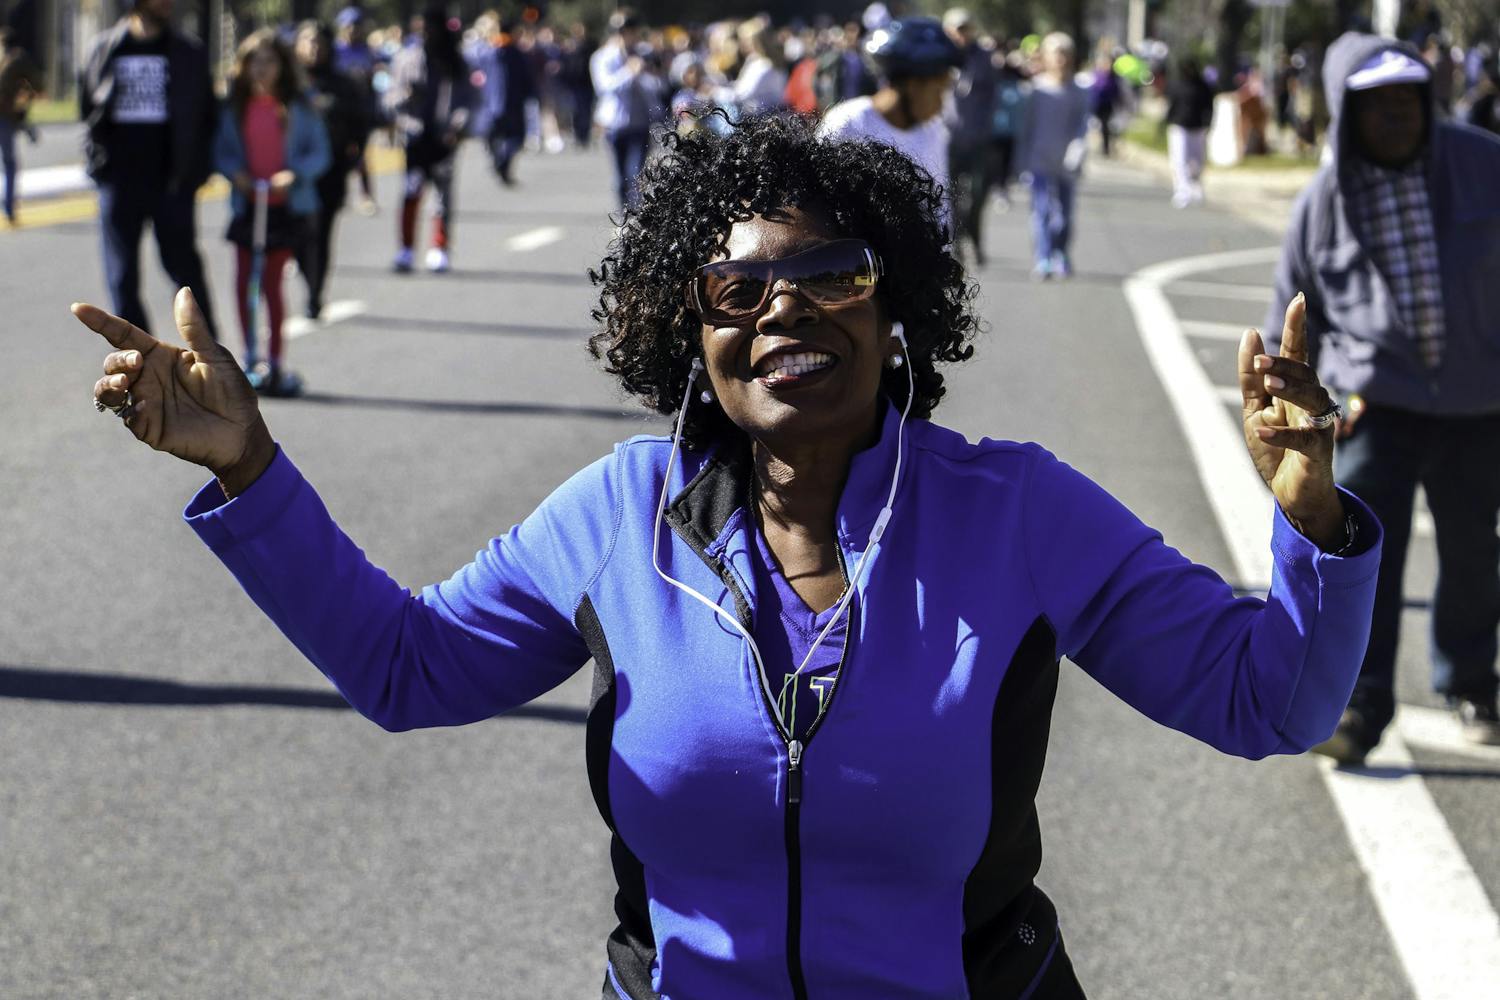 The Annual Commemorative March was one of nine events put on by the Martin Luther King Jr. Commission of Florida Inc. to honor its namesake. The march started at Bo Diddley Plaza at 1 pm on Monday, January 20 and ended in front of the King Center, the location of the last event. 